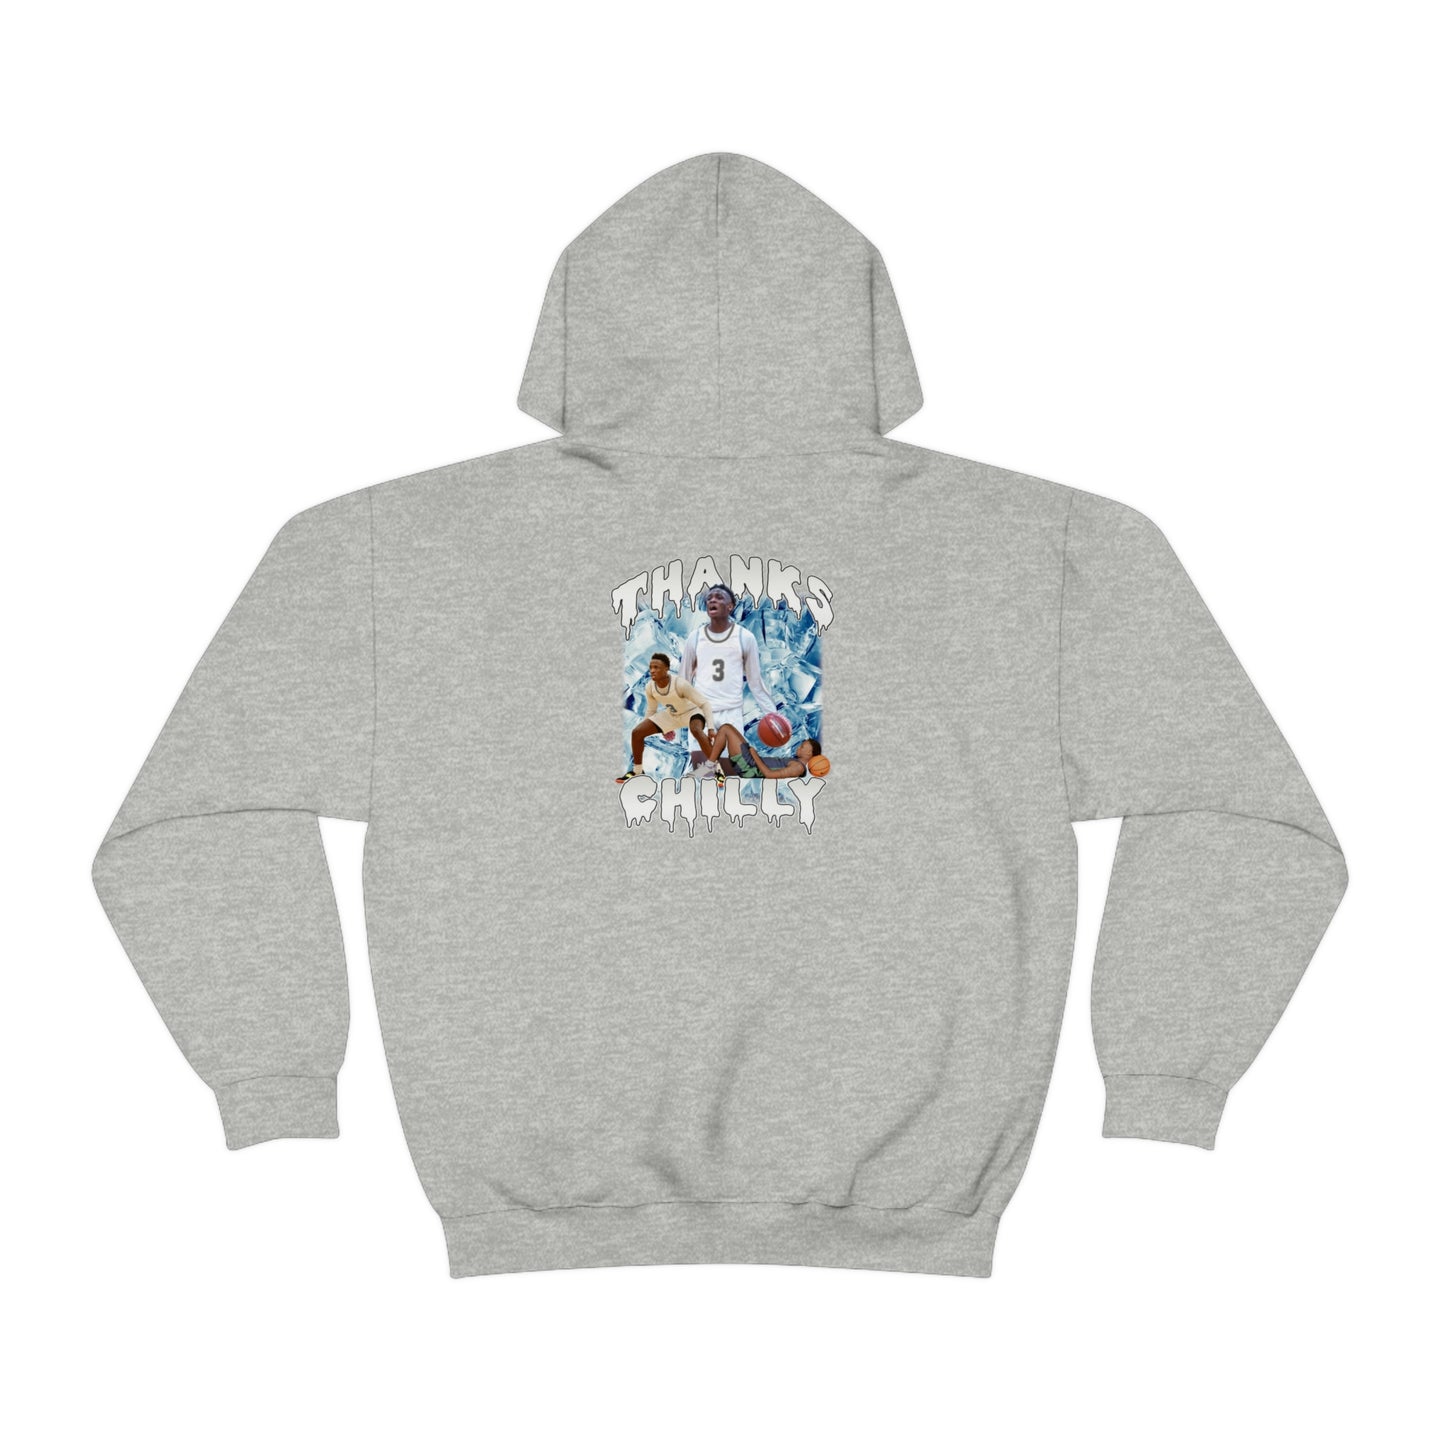 Charles Fofanah: Thanks Chilly Hoodie